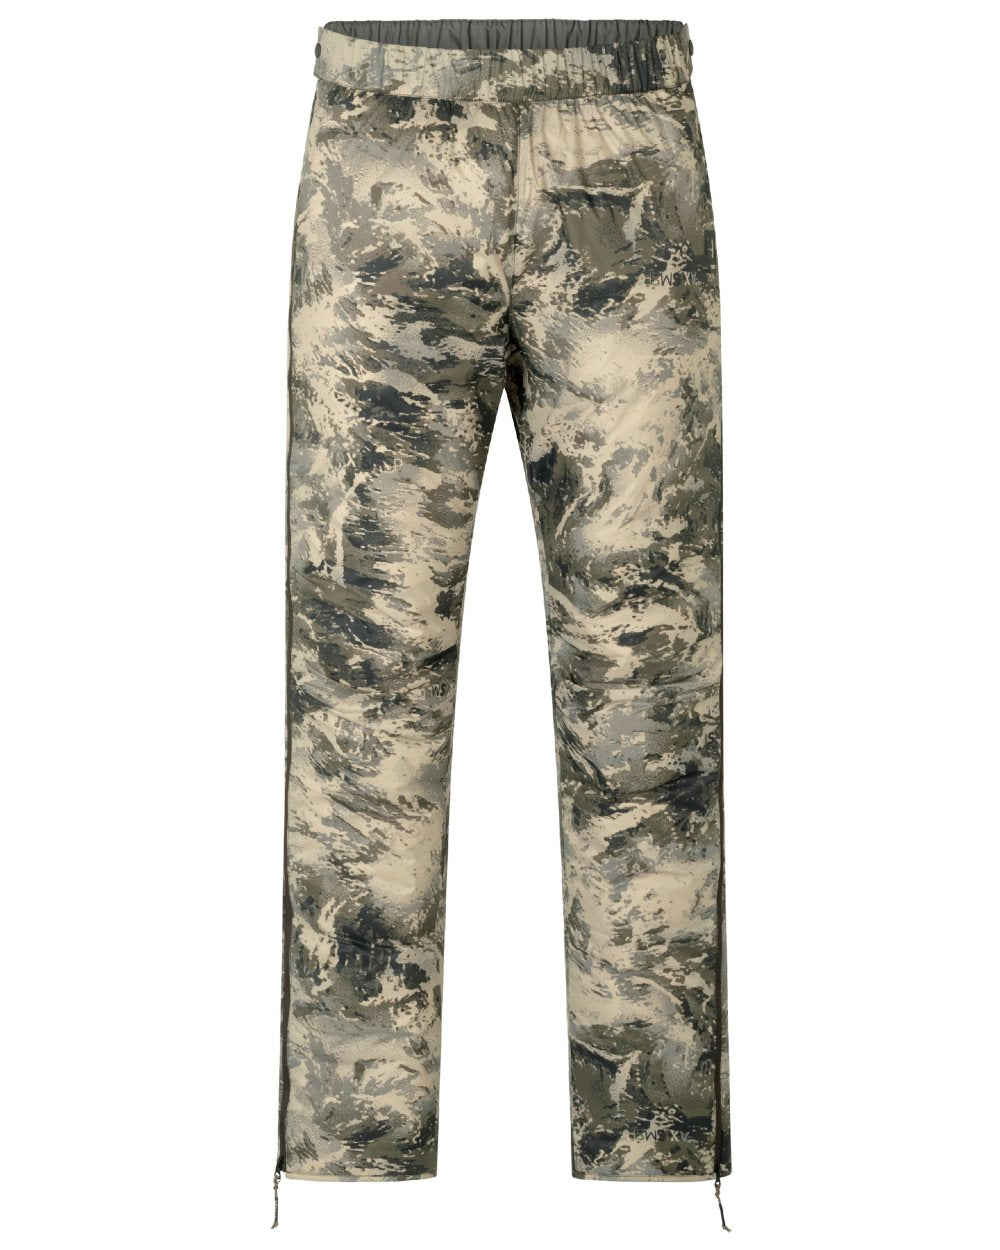 AXIS Forest coloured Harkila Mountain Hunter Expedition Packable Down Trousers front on white background